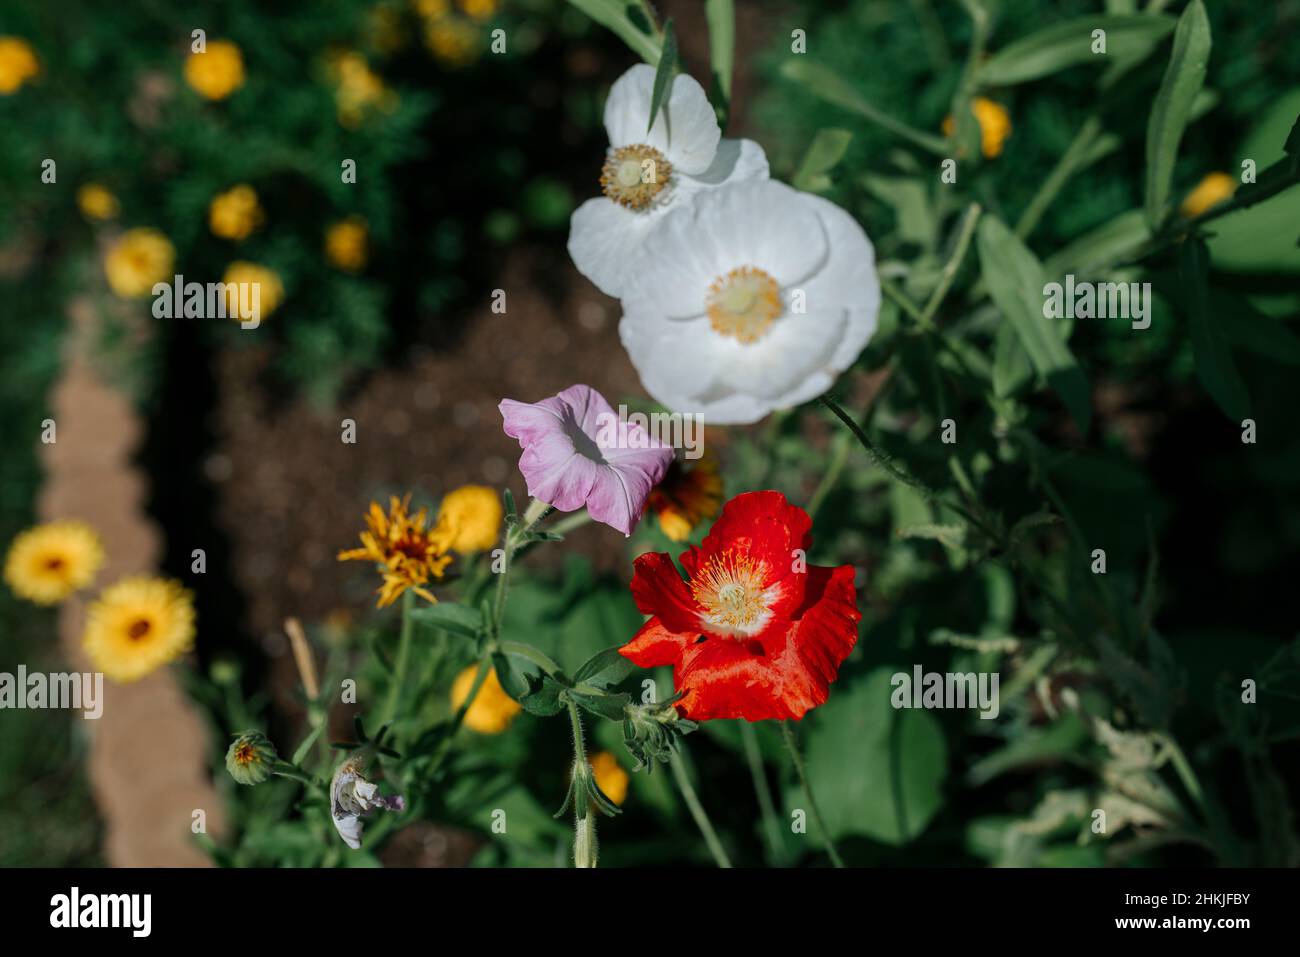 Close up view of flower blooms, poppies, petunias, and marigolds Stock Photo